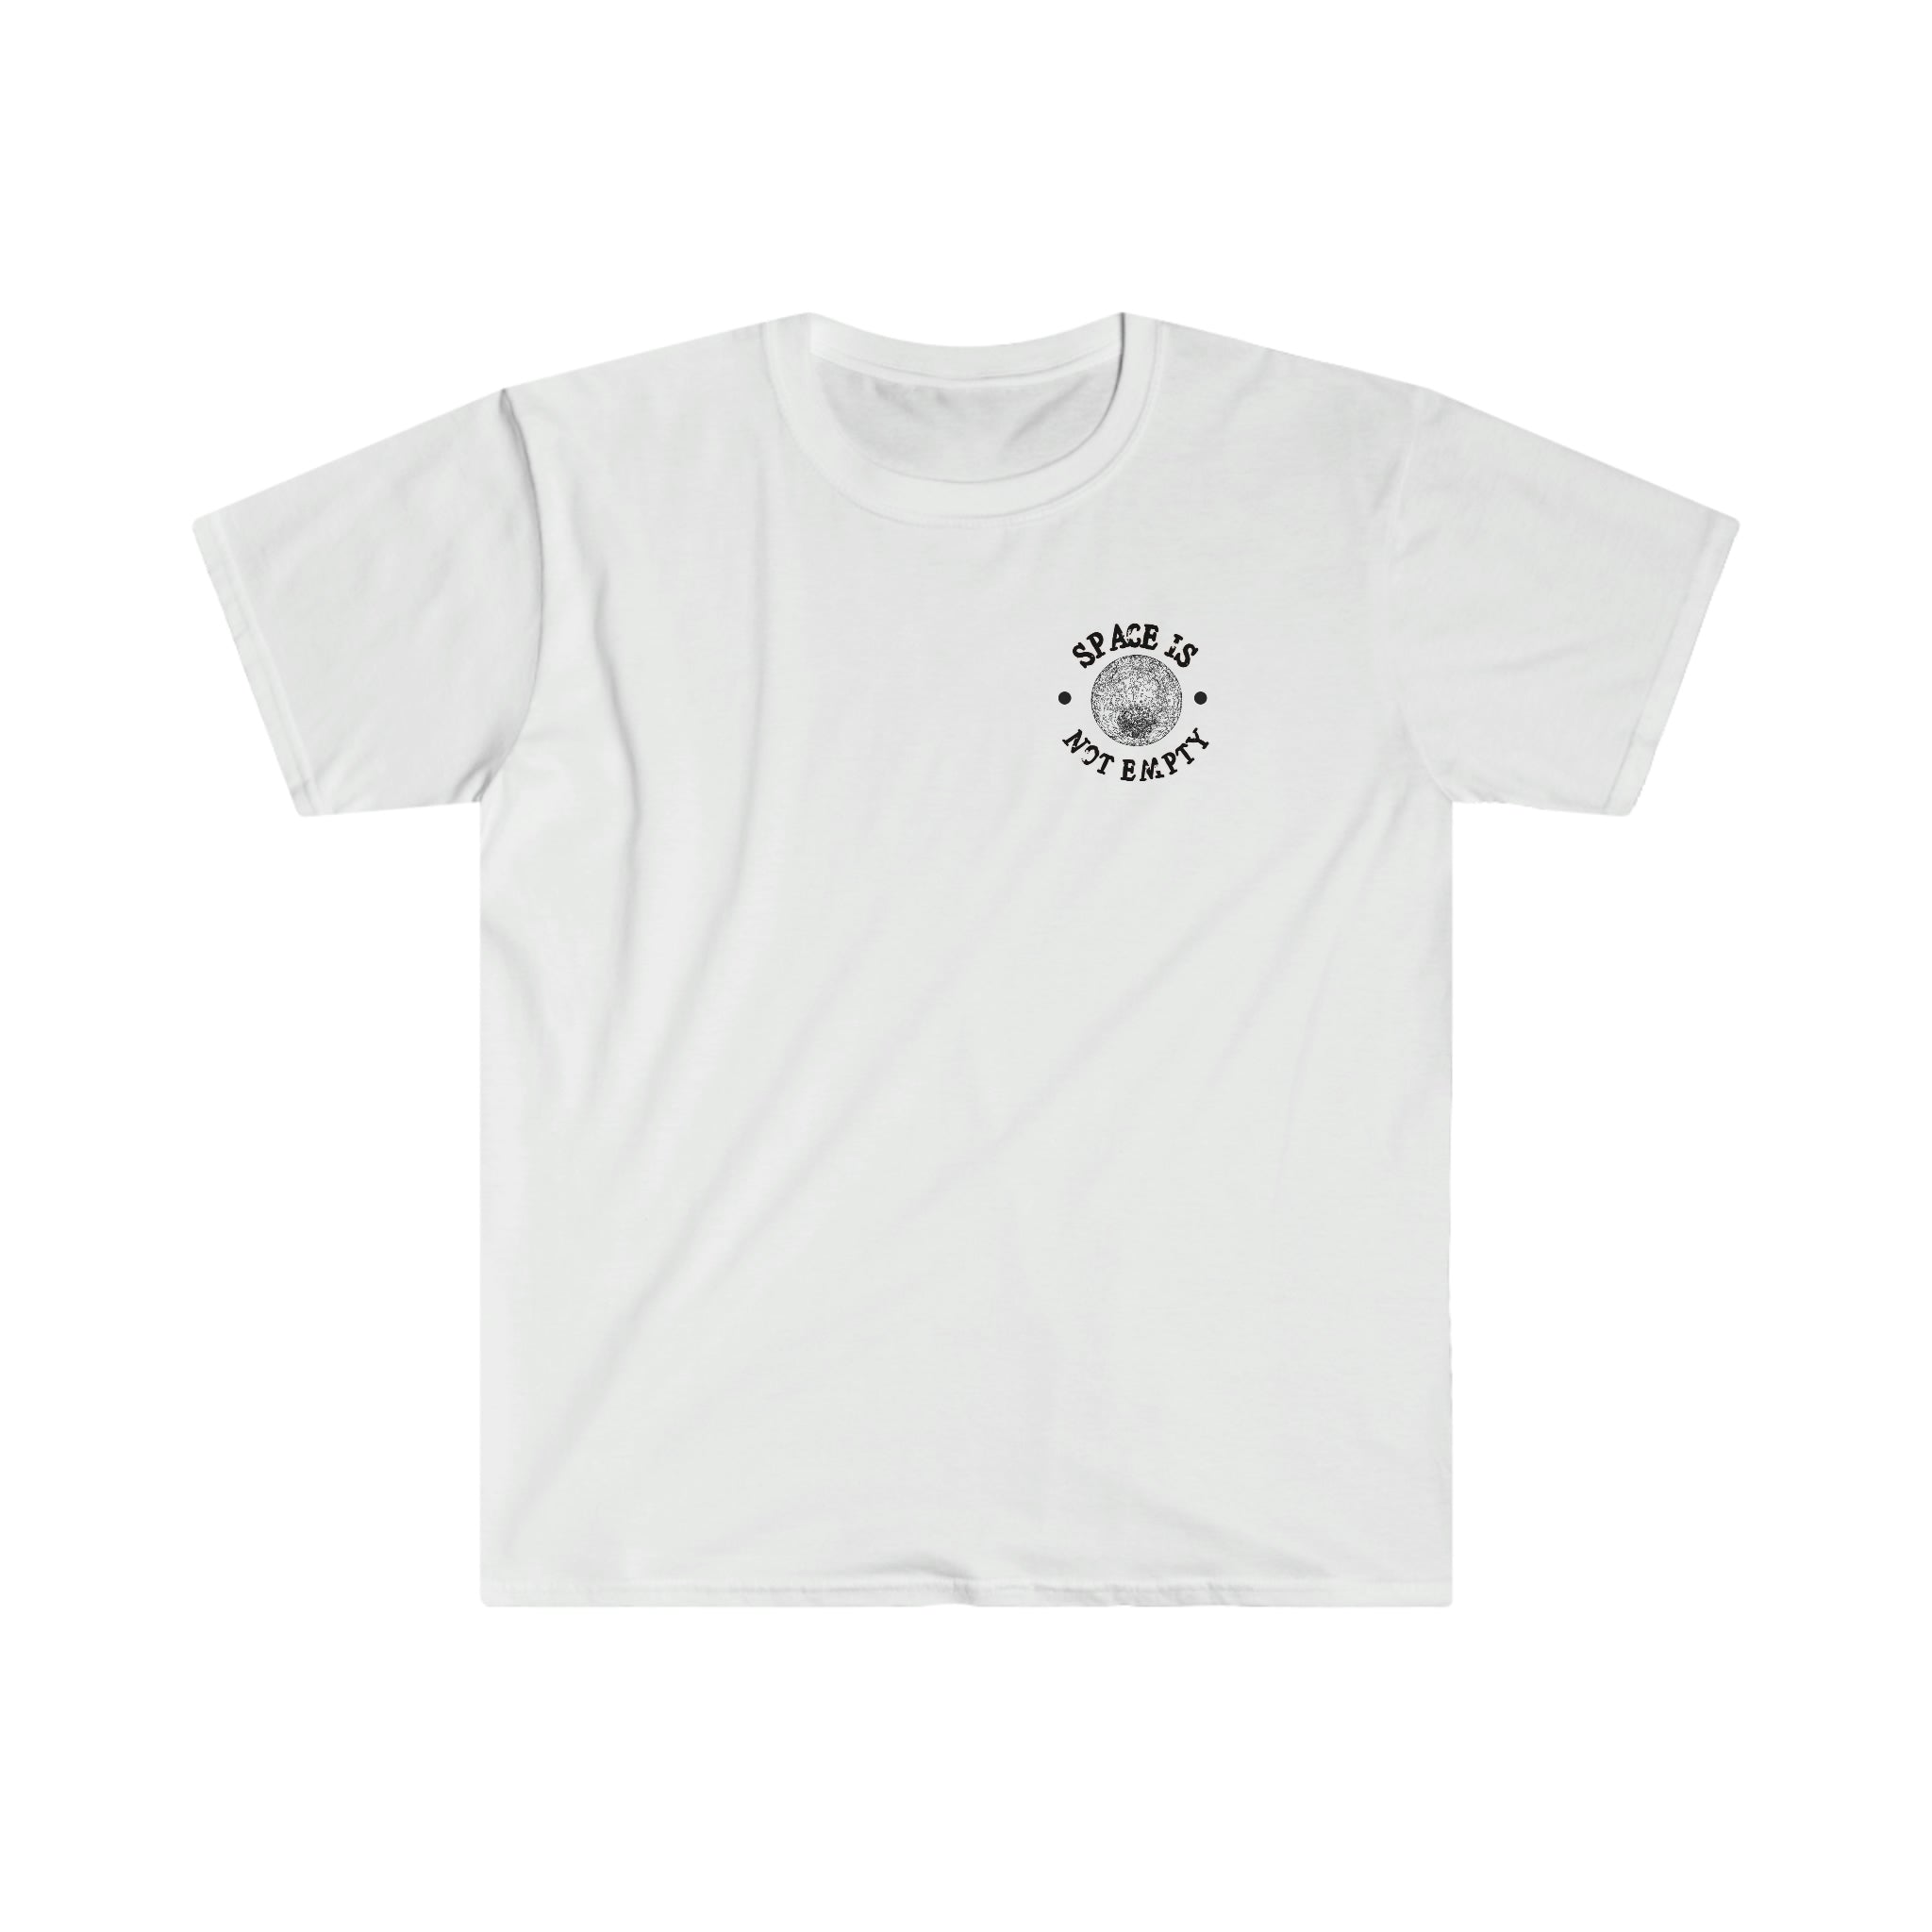 A black-logoed white Space is my goal T-shirt that adds style to your wardrobe.